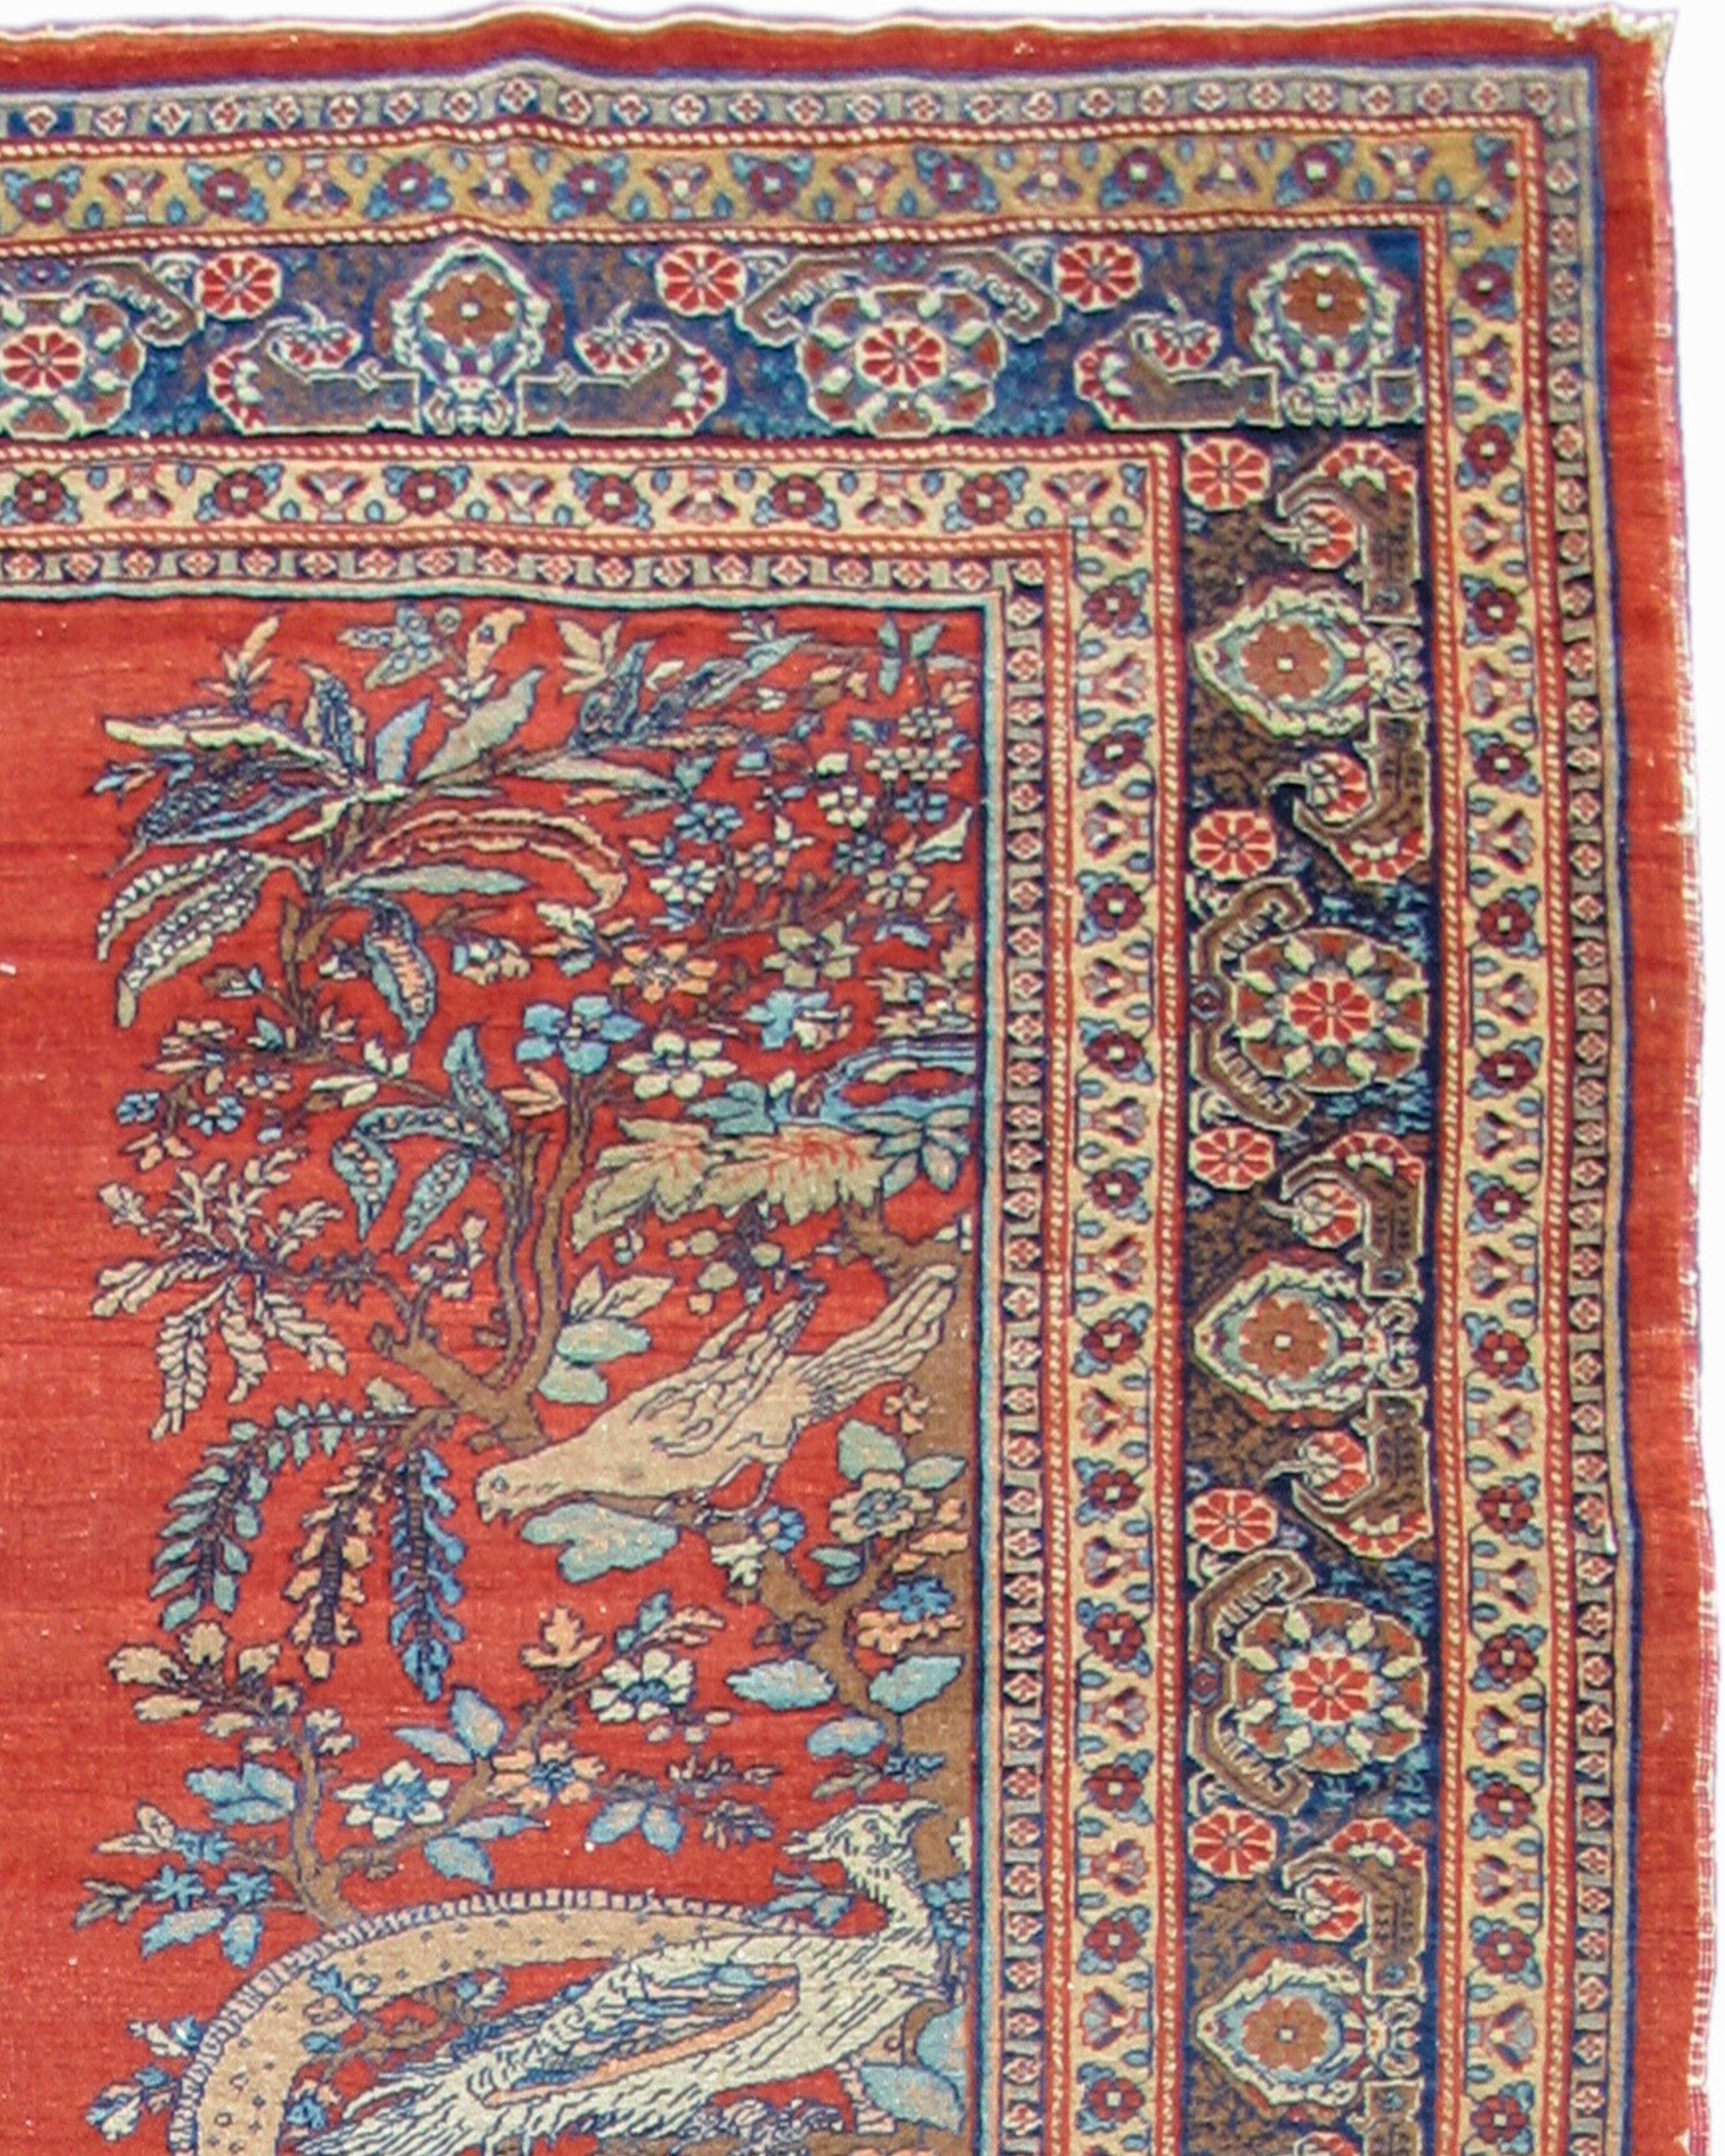 Antique Persian Pictorial Tabriz Rug, 19th Century

This pictorial Tabriz from the 19th Century depicts men riding camels, a pair of dragons, monkeys, and chickens among other animals. 

Additional Information:
Dimensions: 4'6